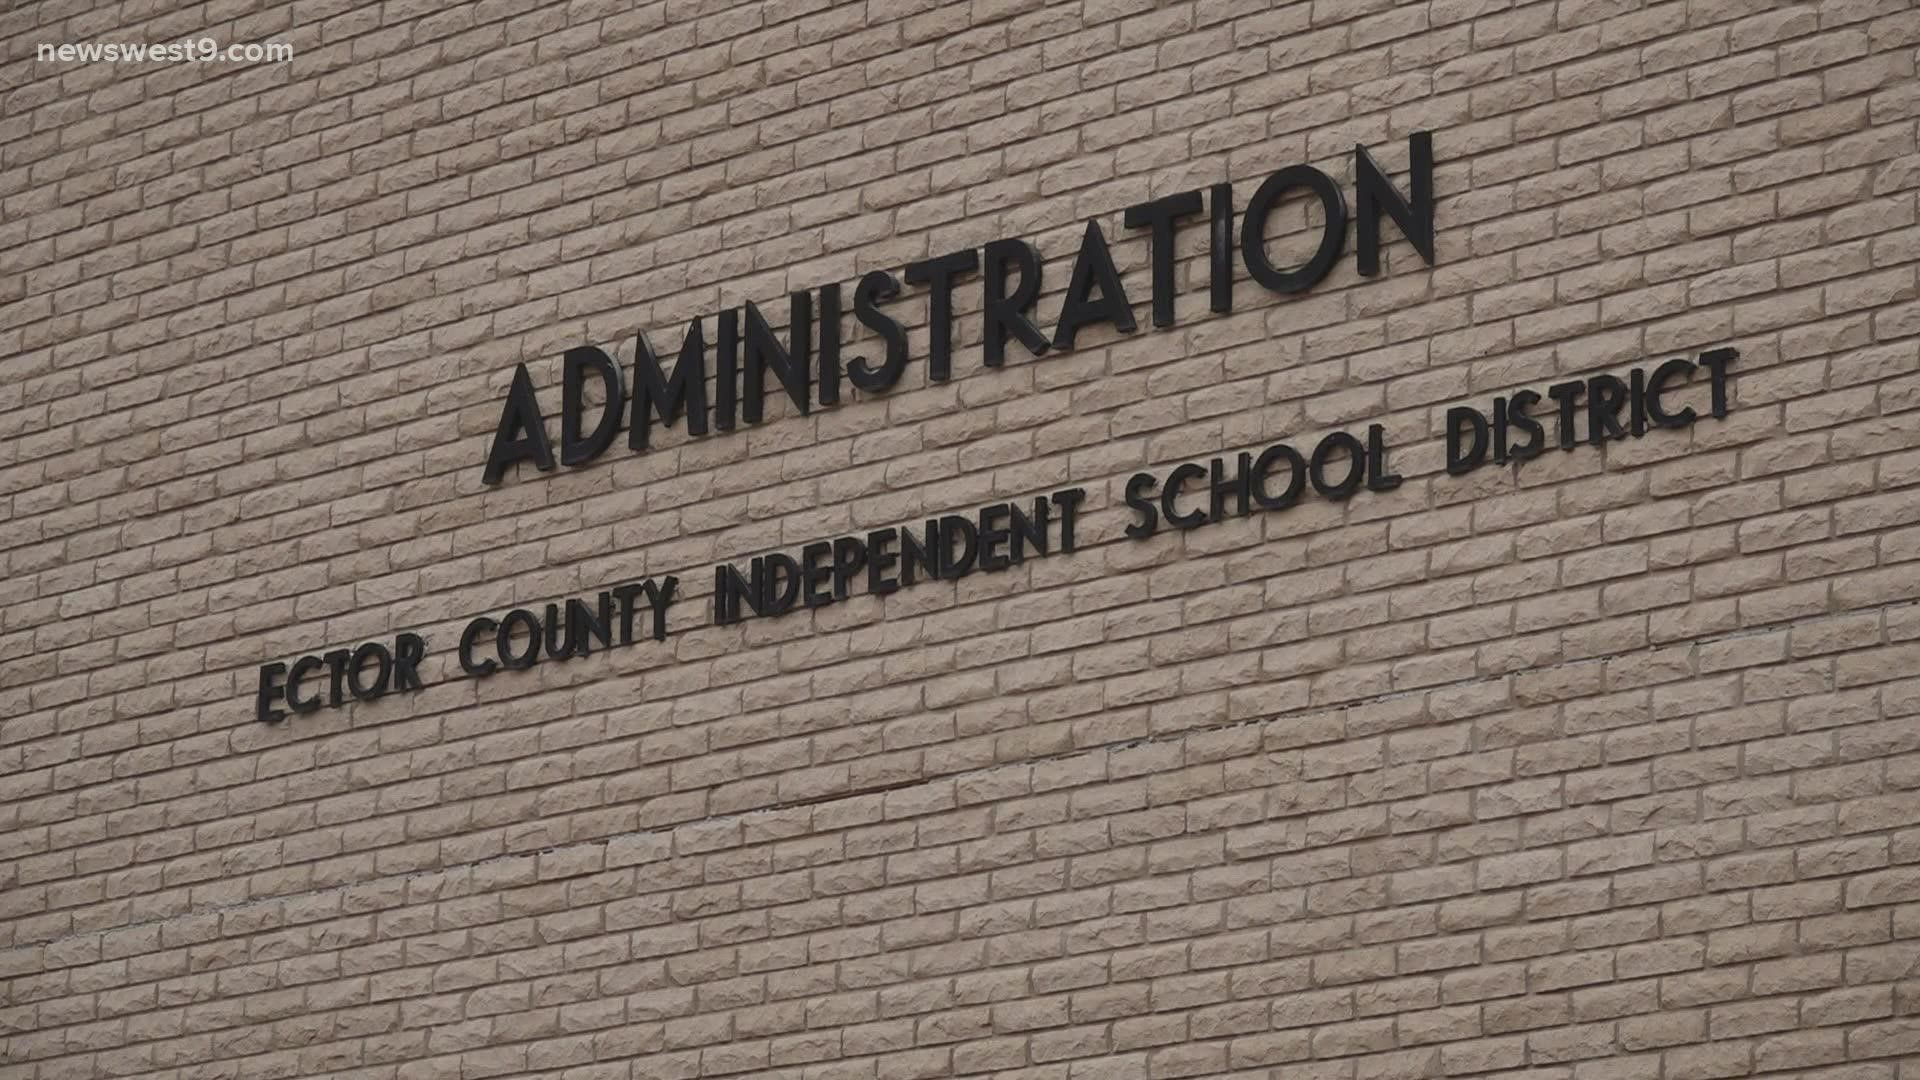 Ector County voters will have the chance to approve a $398 million dollar school bond proposal, which could include a new high school.